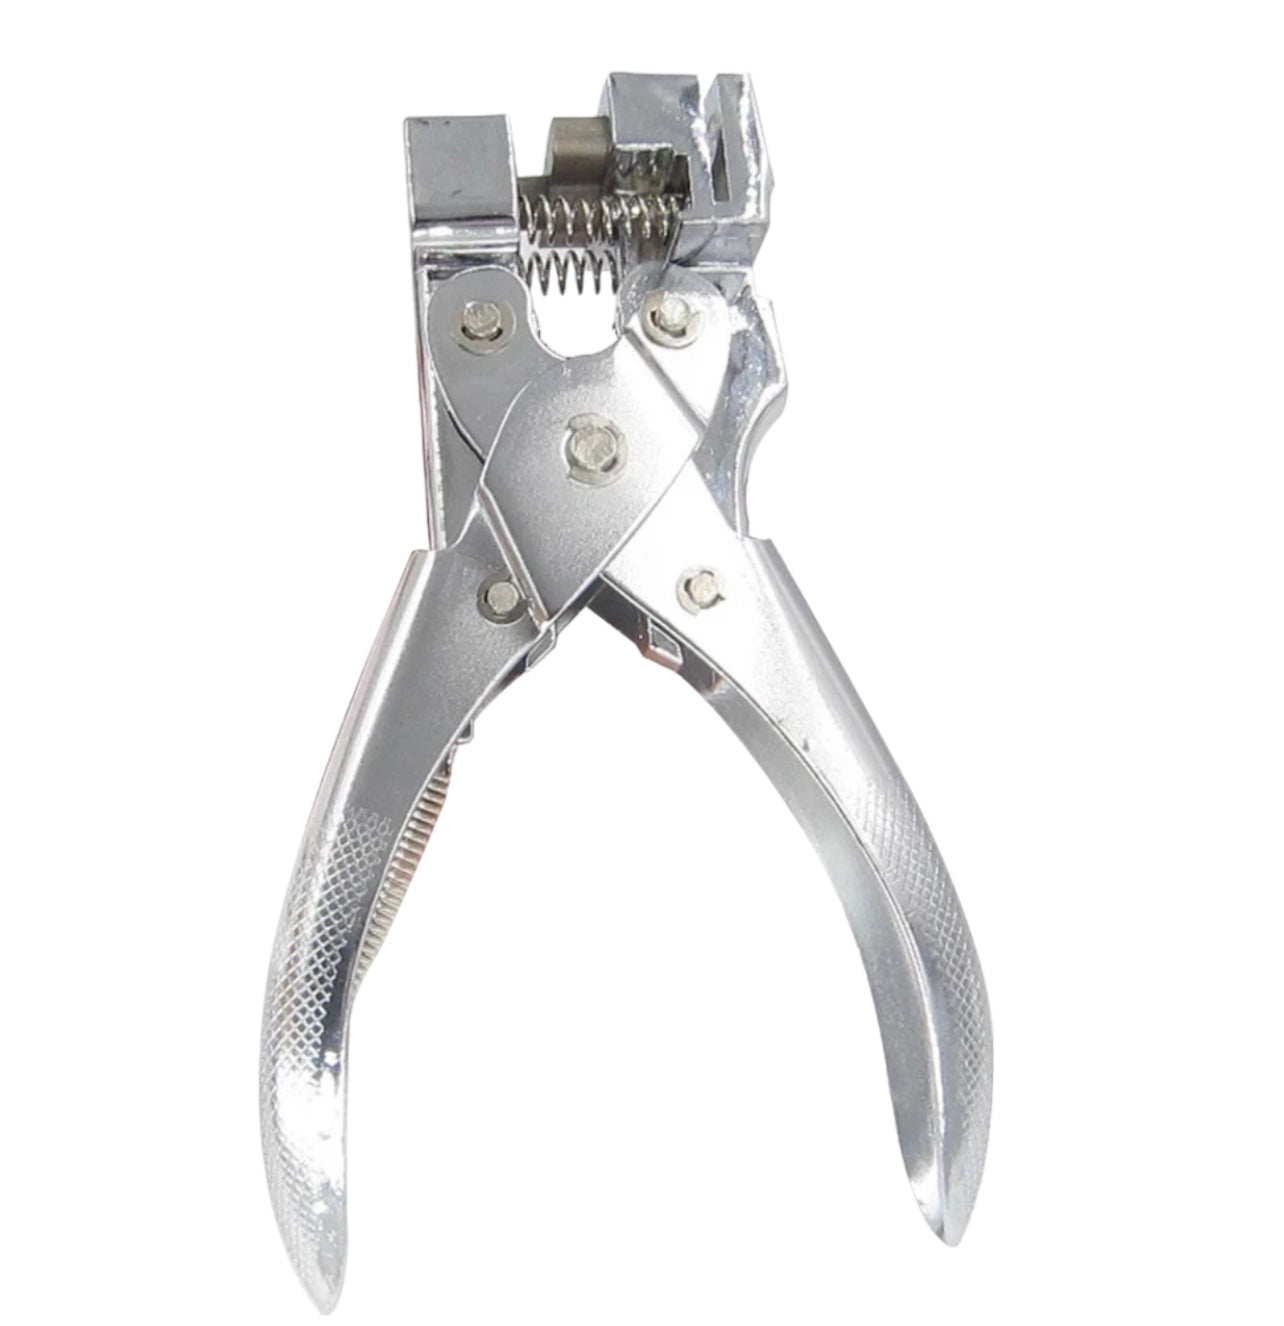 T-shaped Pliers/Hole Punch - Perfect for cutting holes in paper, PVC, plastic, ID cards, cell phone film and more - Dimensions: 6x10x30mm